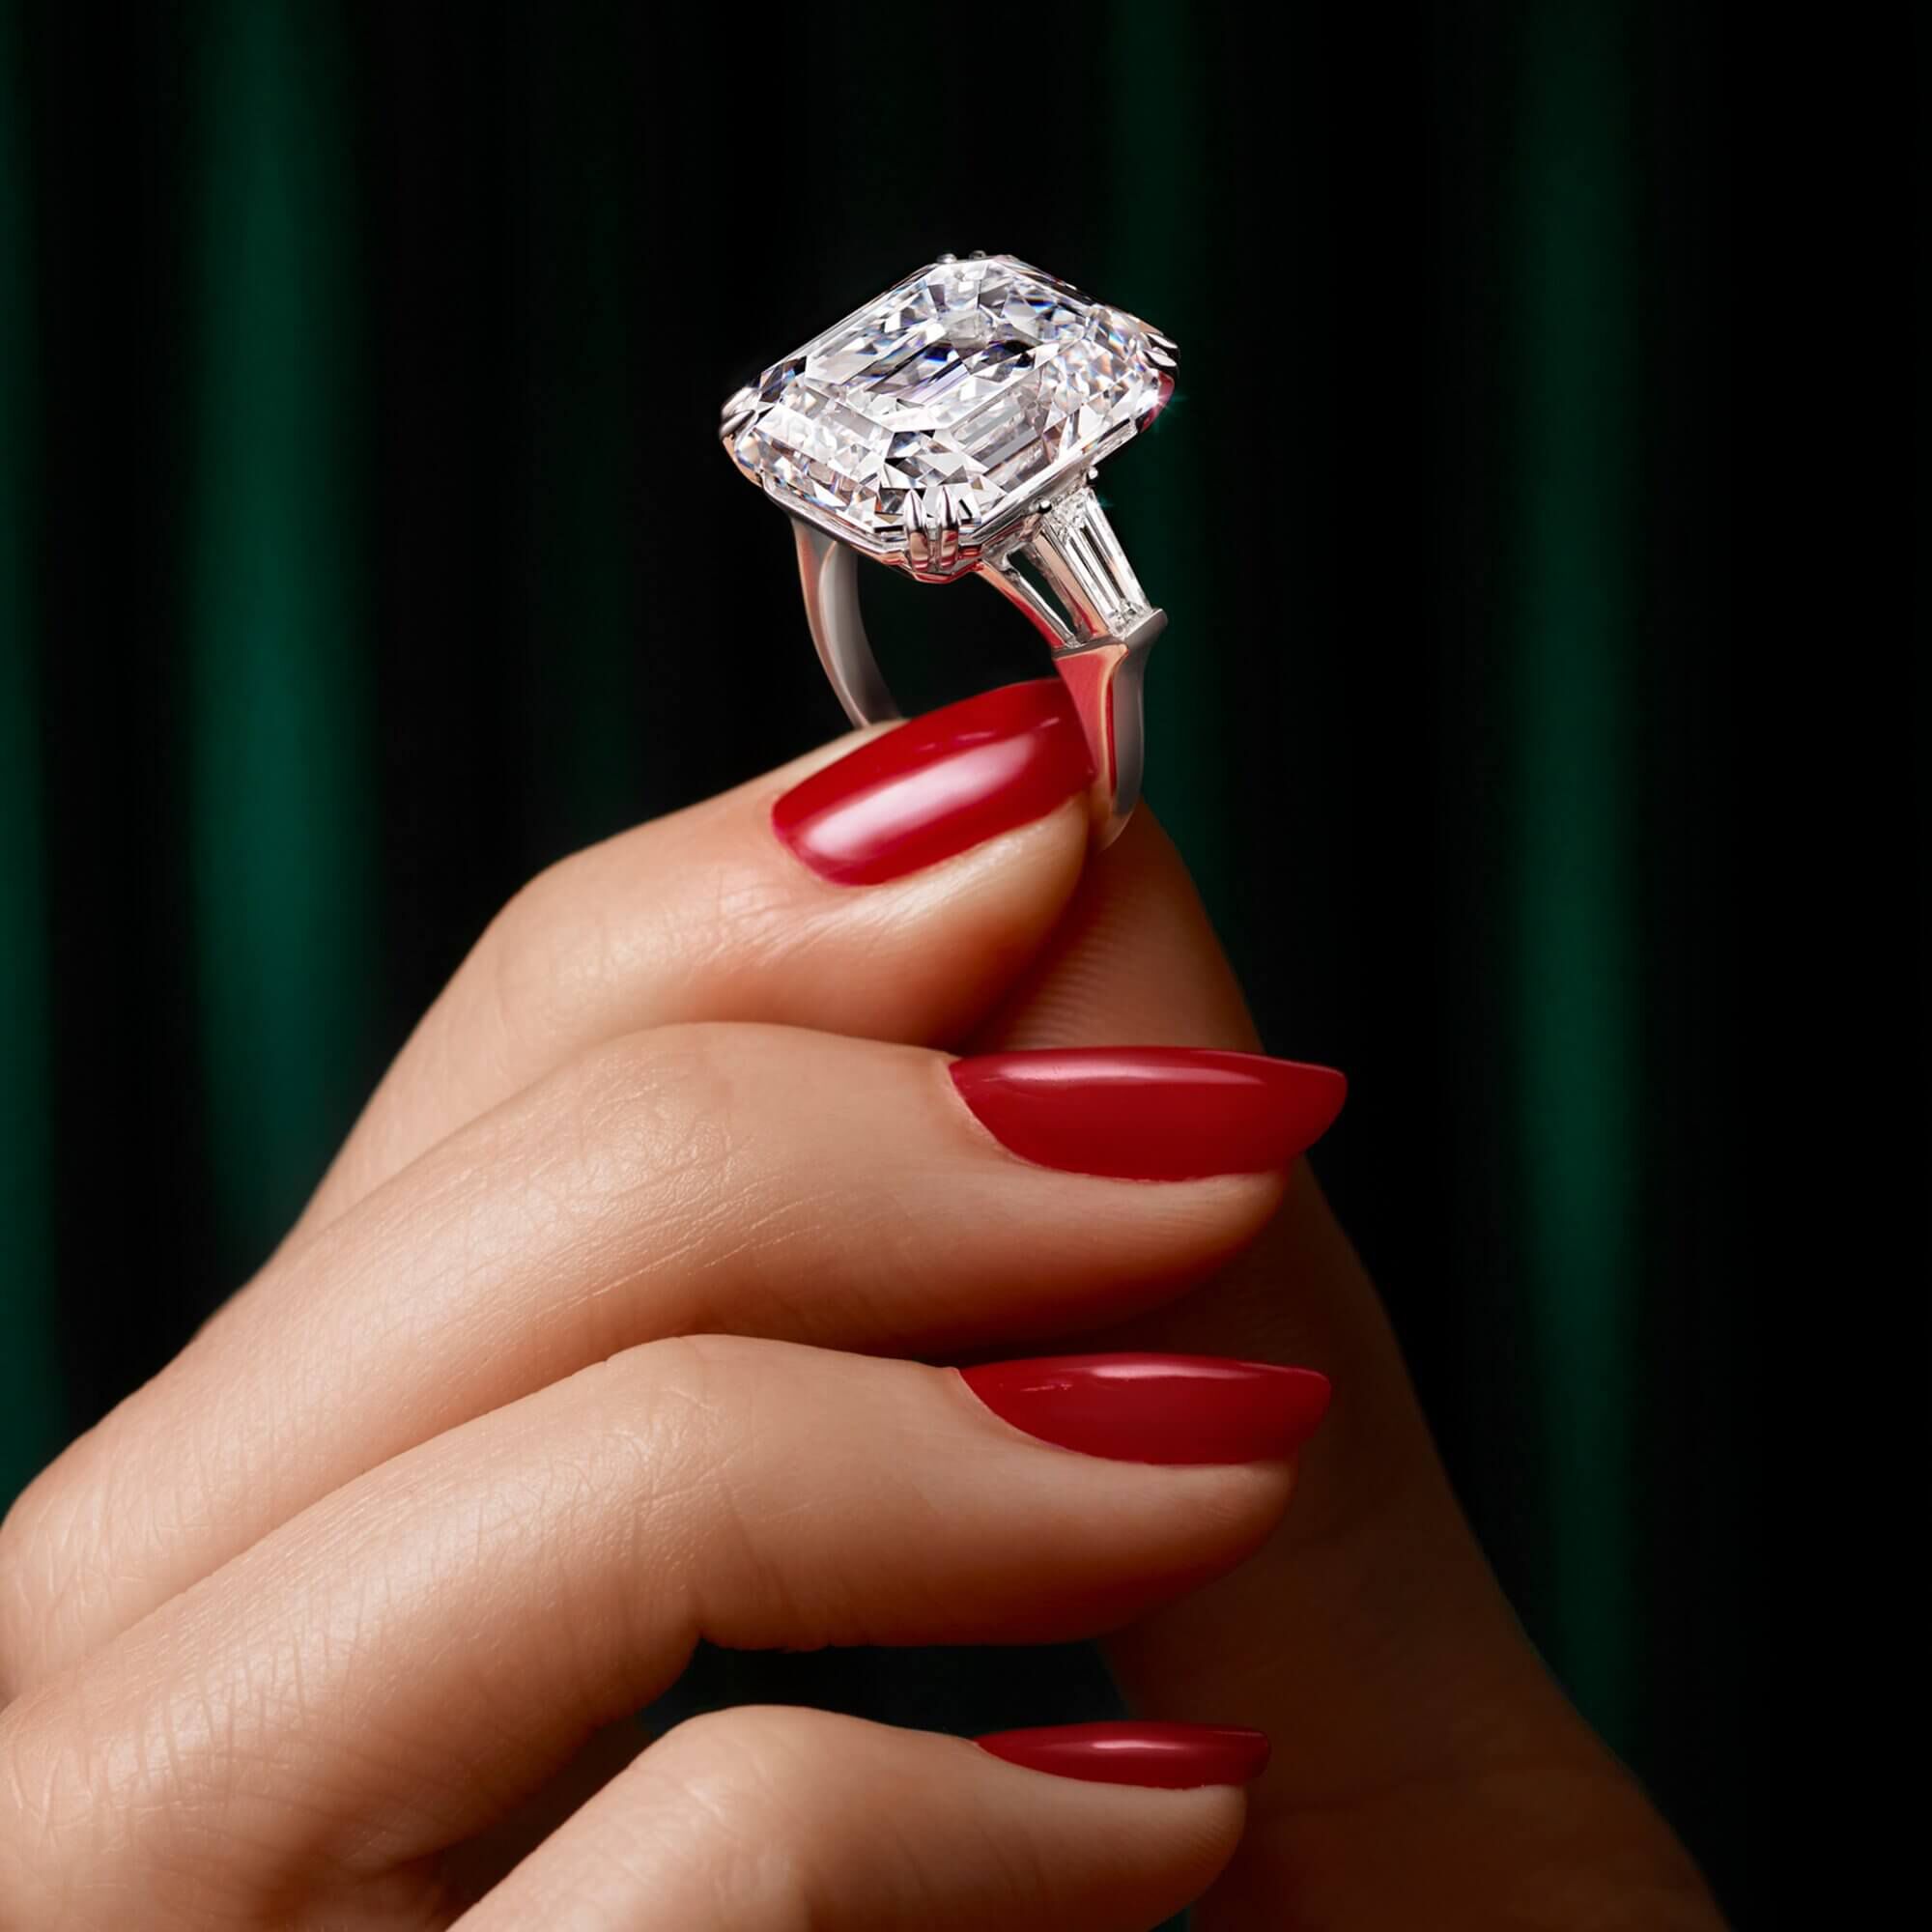 Model holding an emerald cut diamond ring from the Graff high jewellery collection